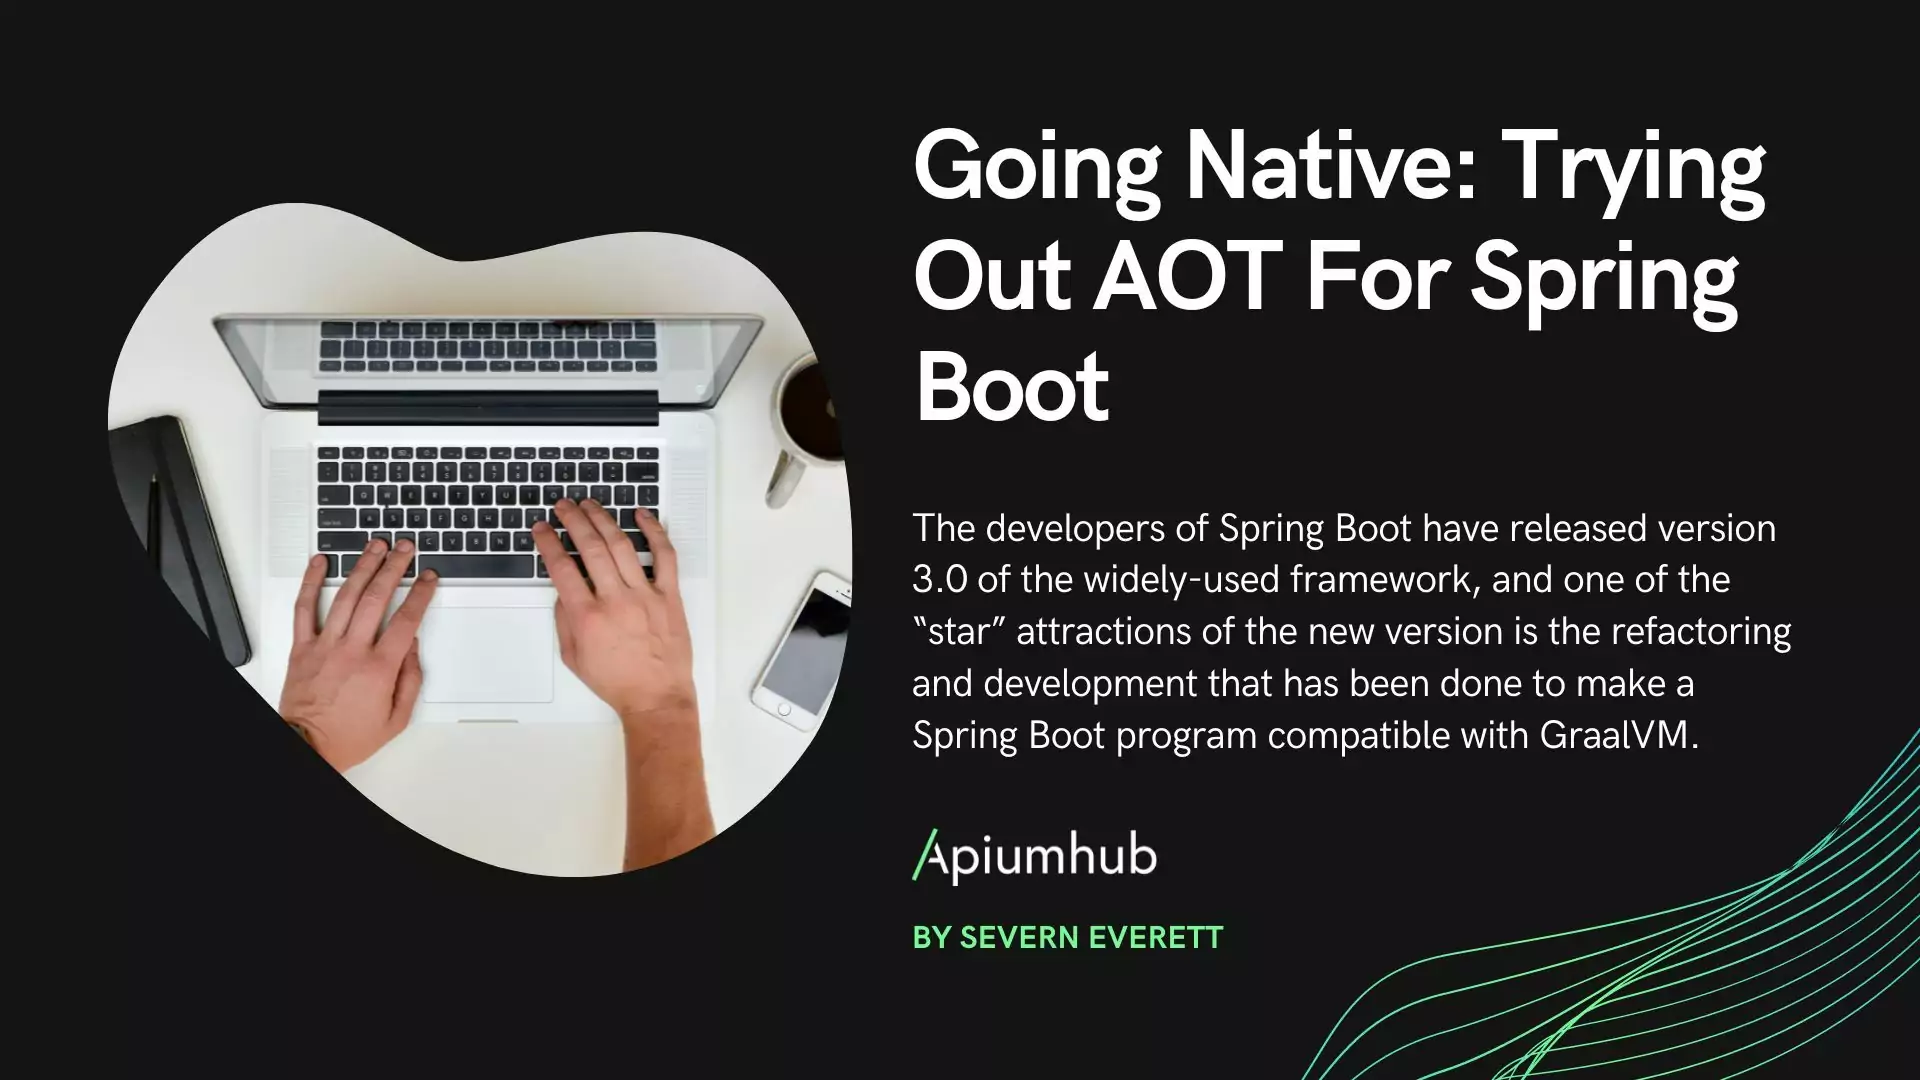 Going Native: Trying Out AOT For Spring Boot